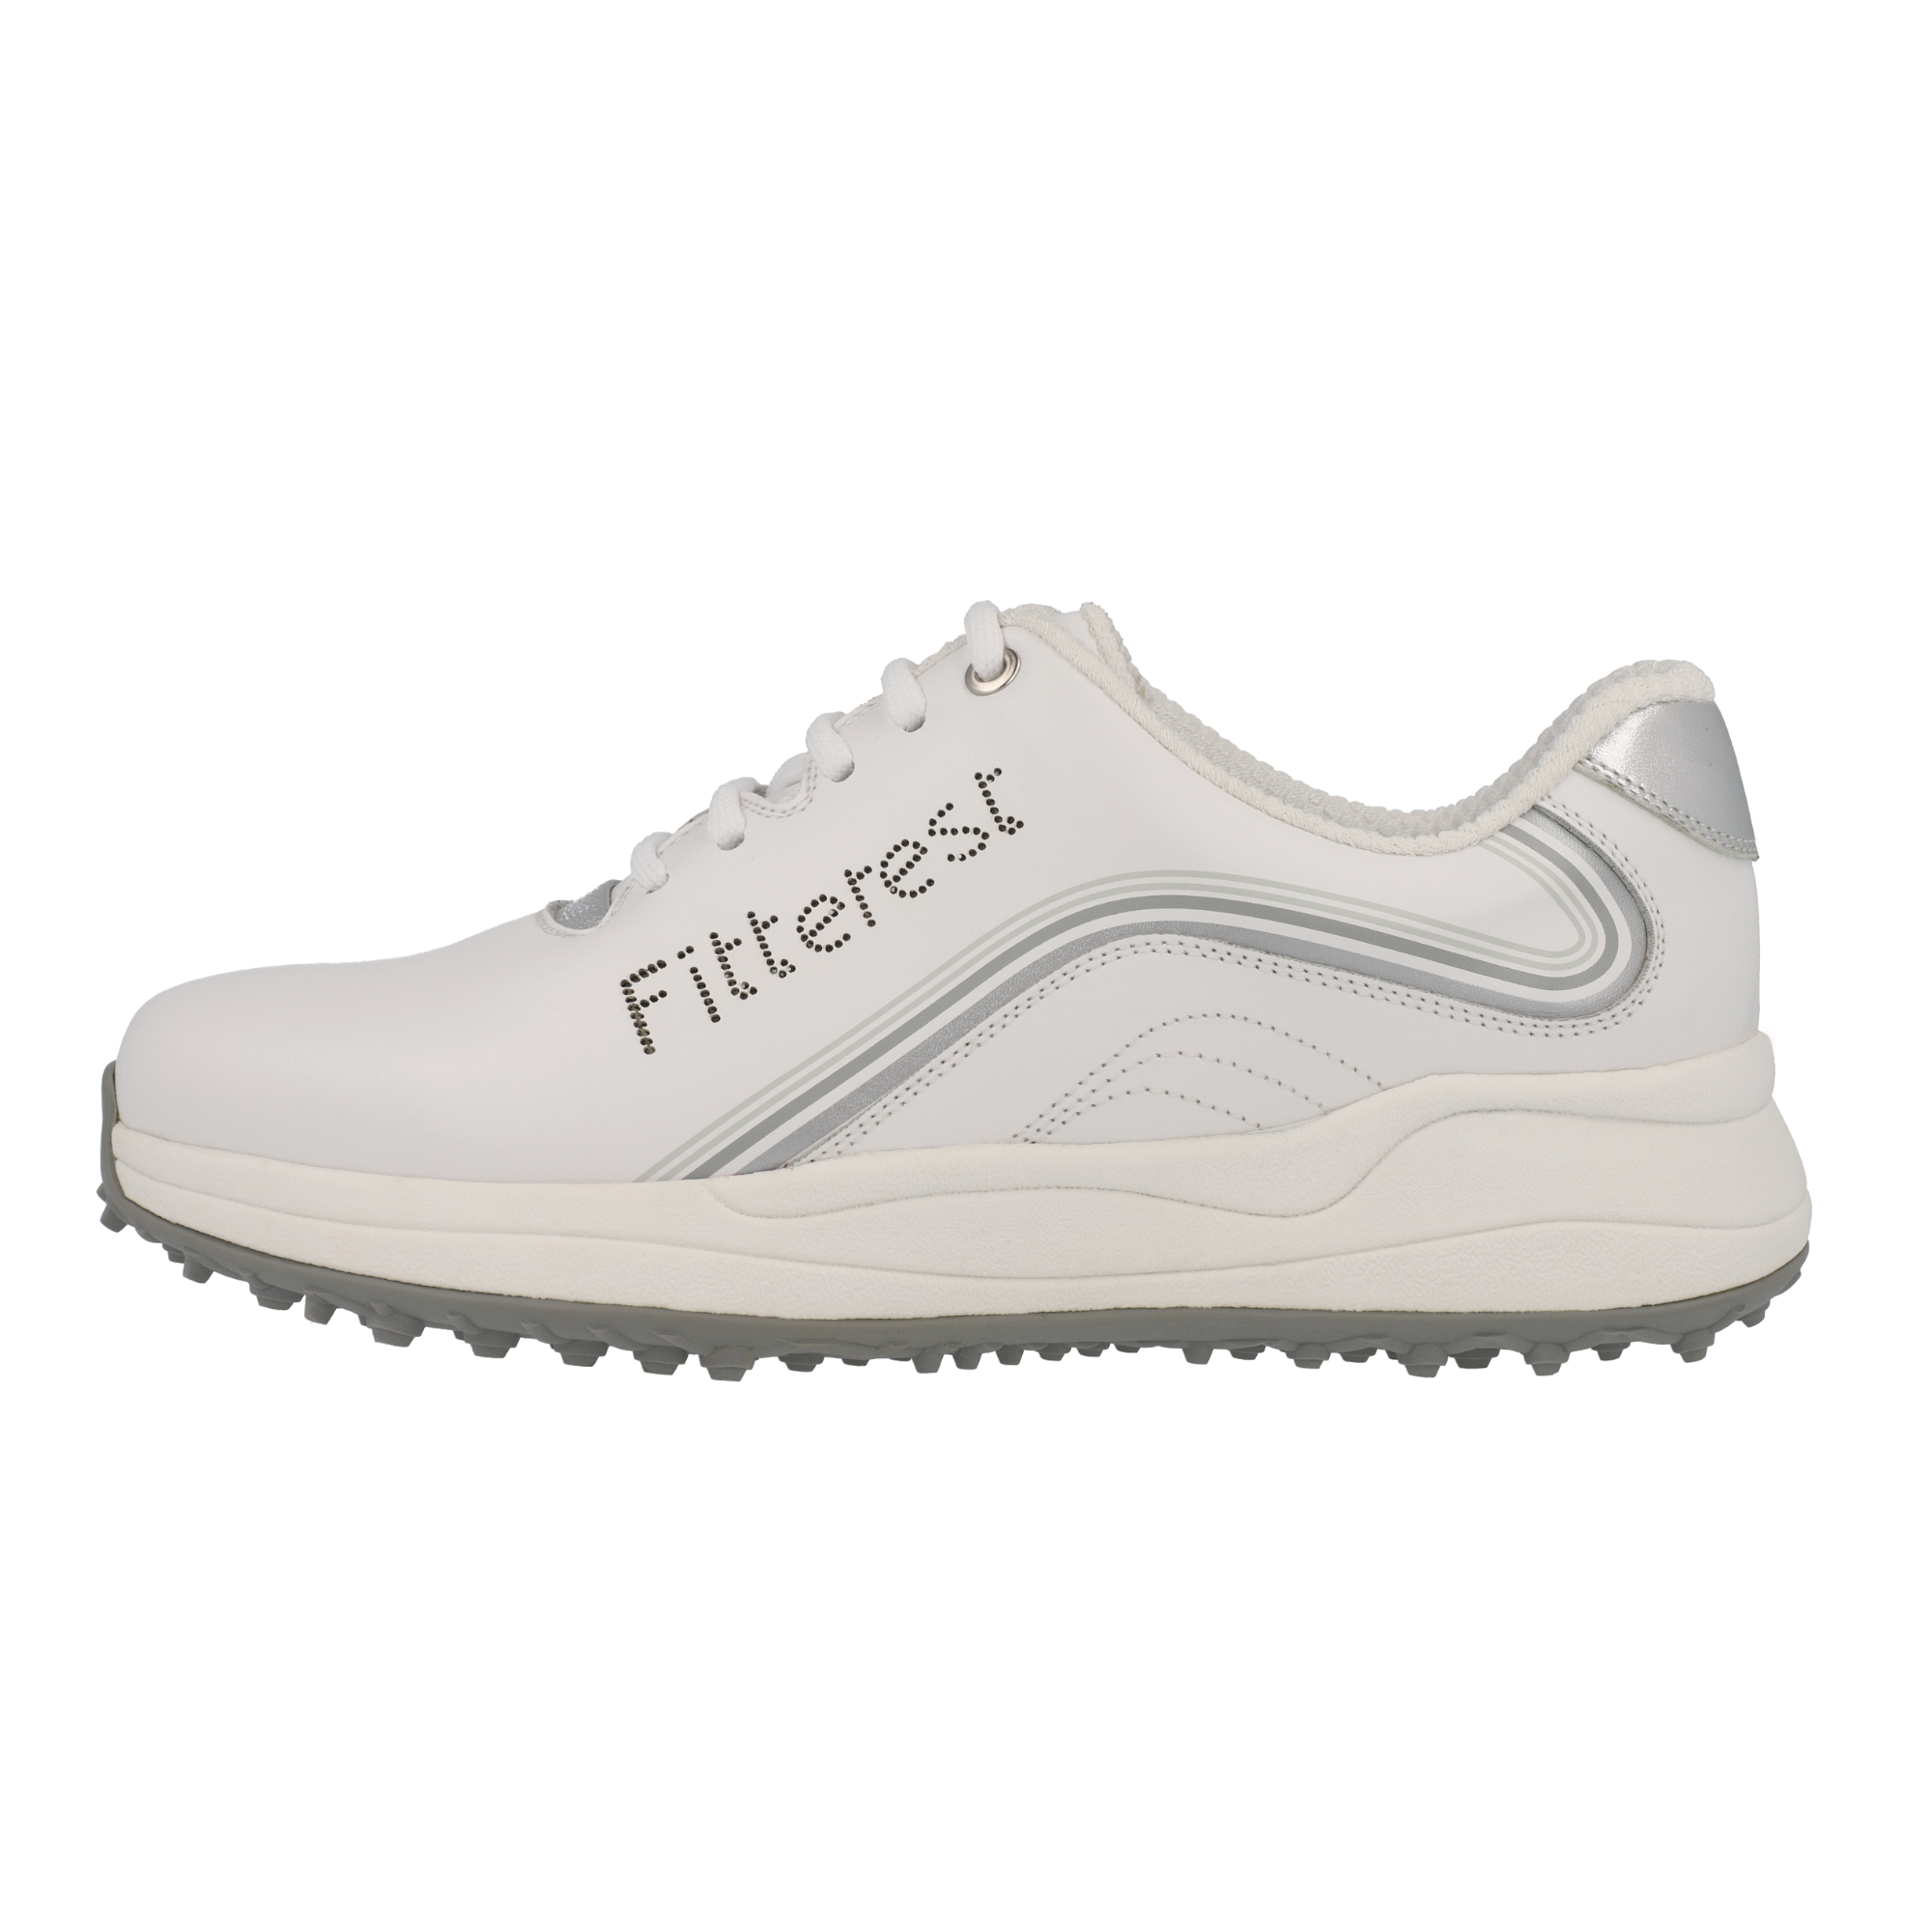 FITTEREST Spider Wave Golf Shoes for Women - FTR W SS SL2207